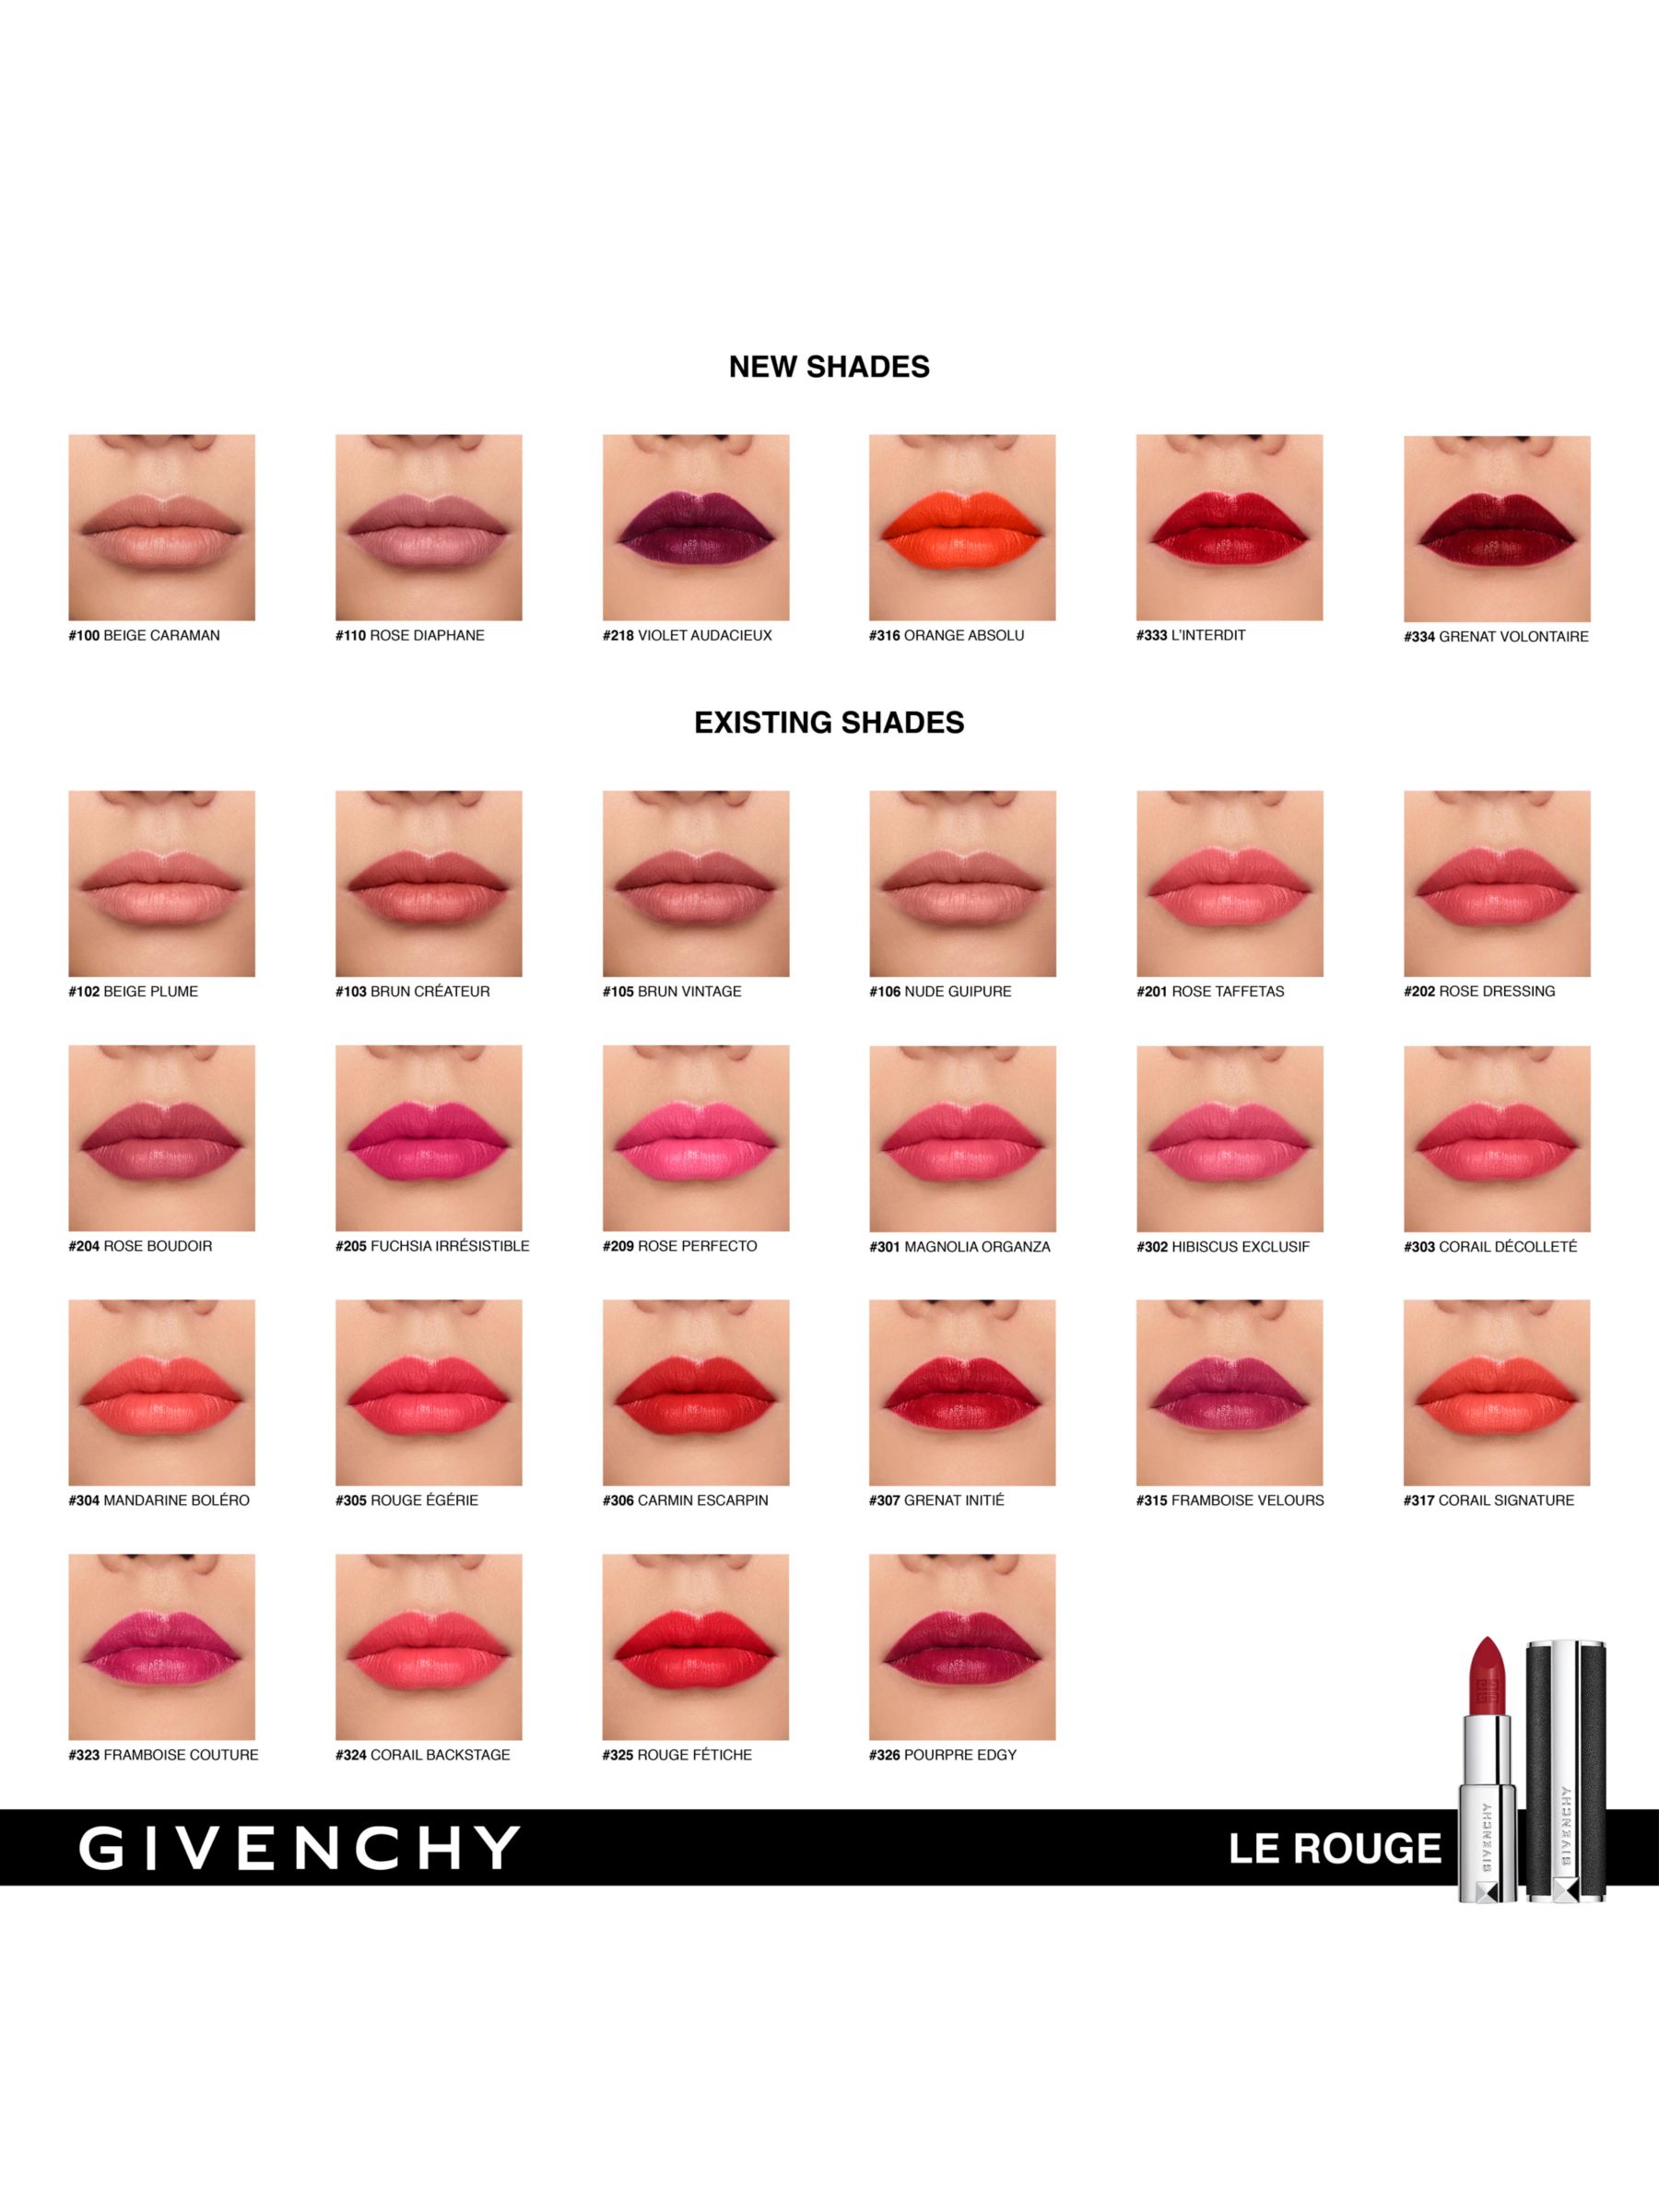 givenchy le rouge 333